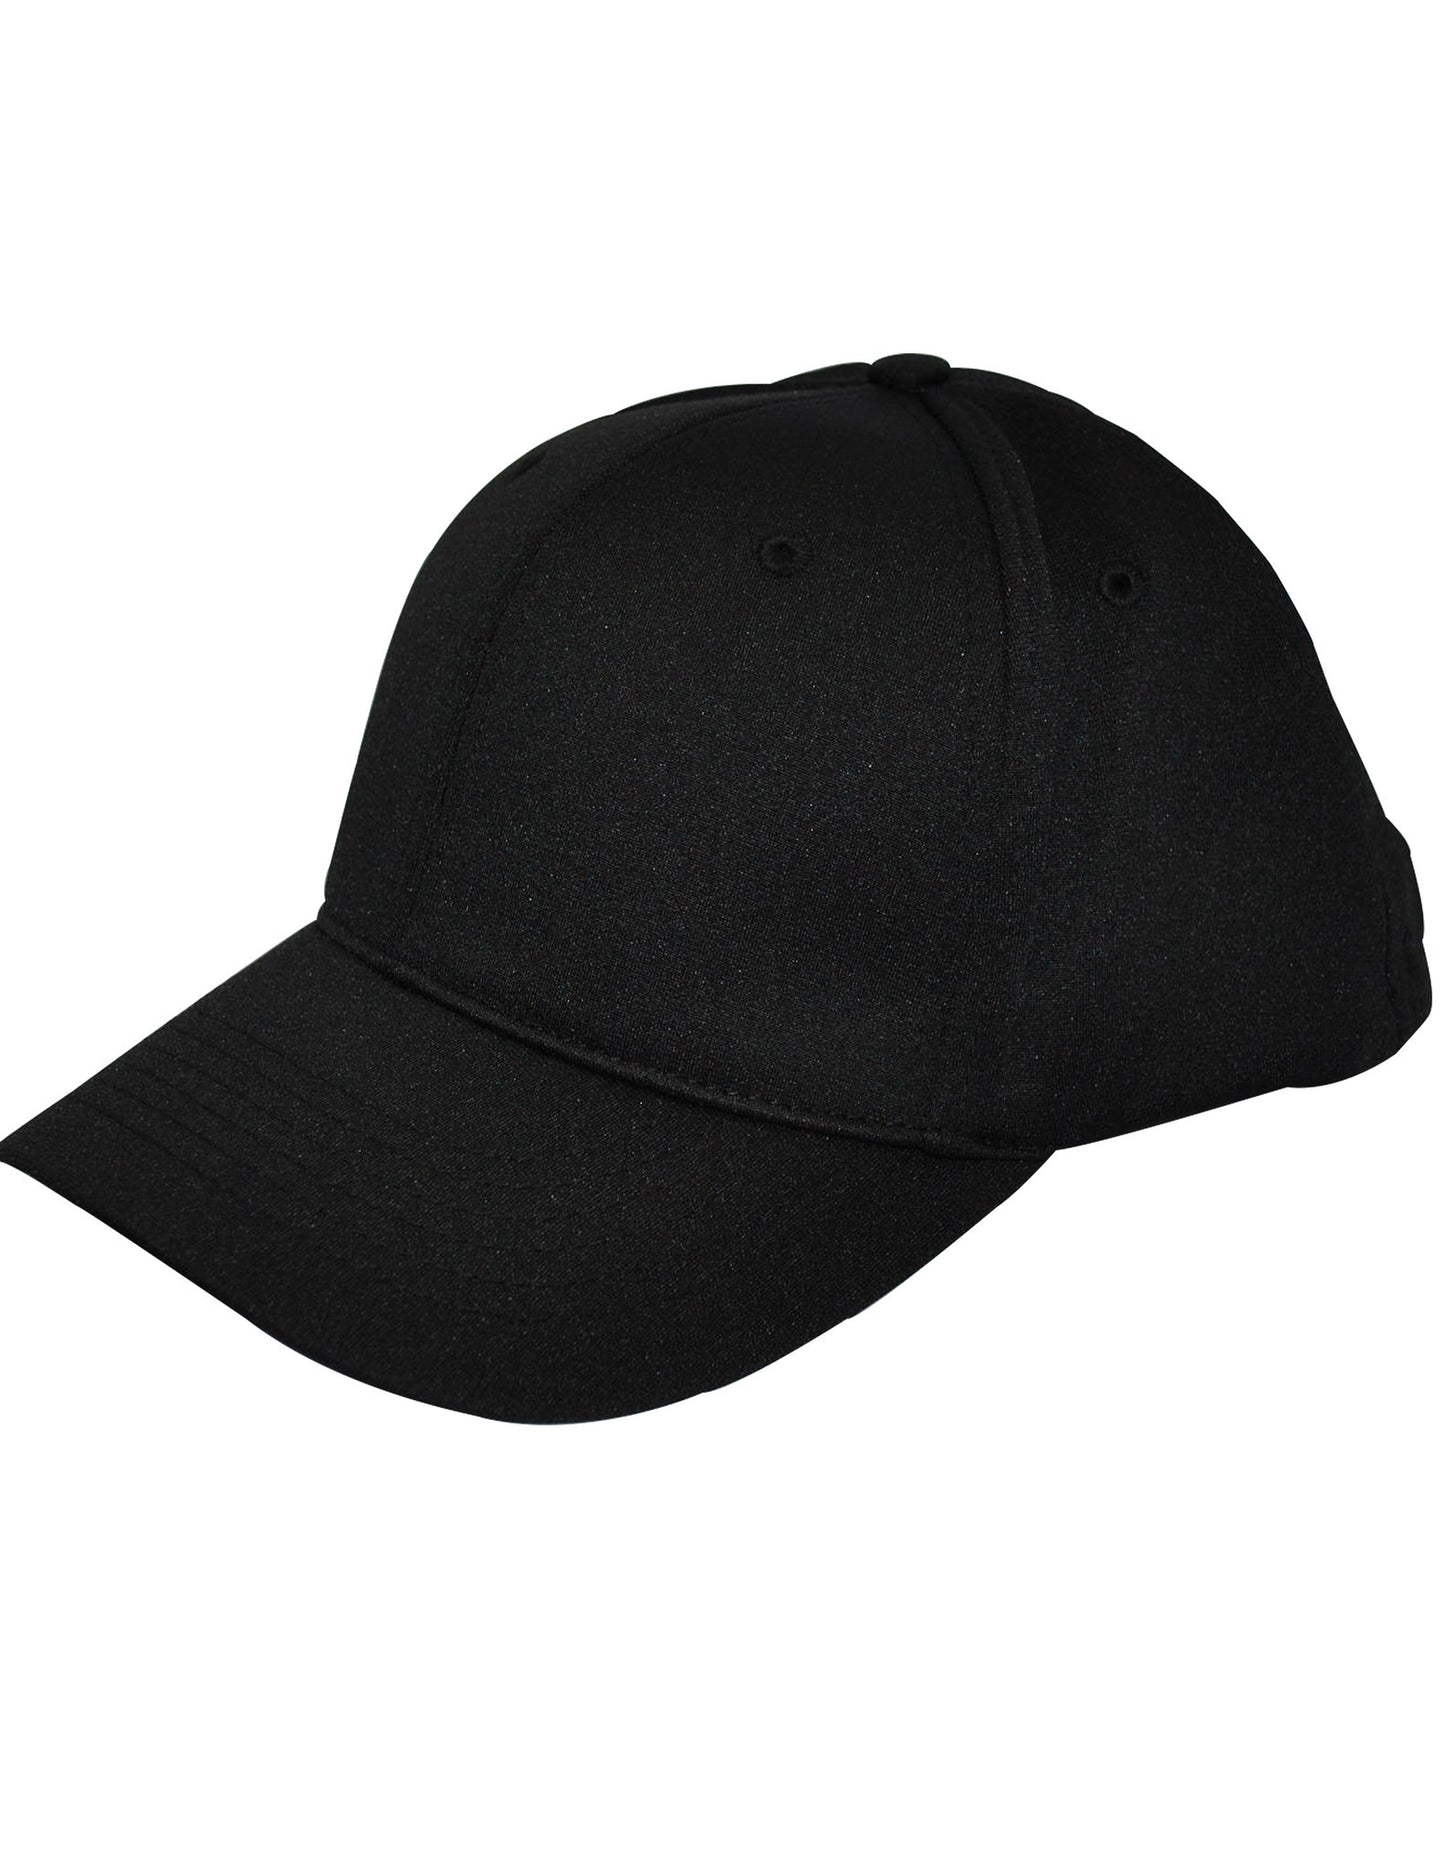 HT306 - Smitty - 6 Stitch Flex Fit Umpire (COMBO) Hat - Available in Black and Navy